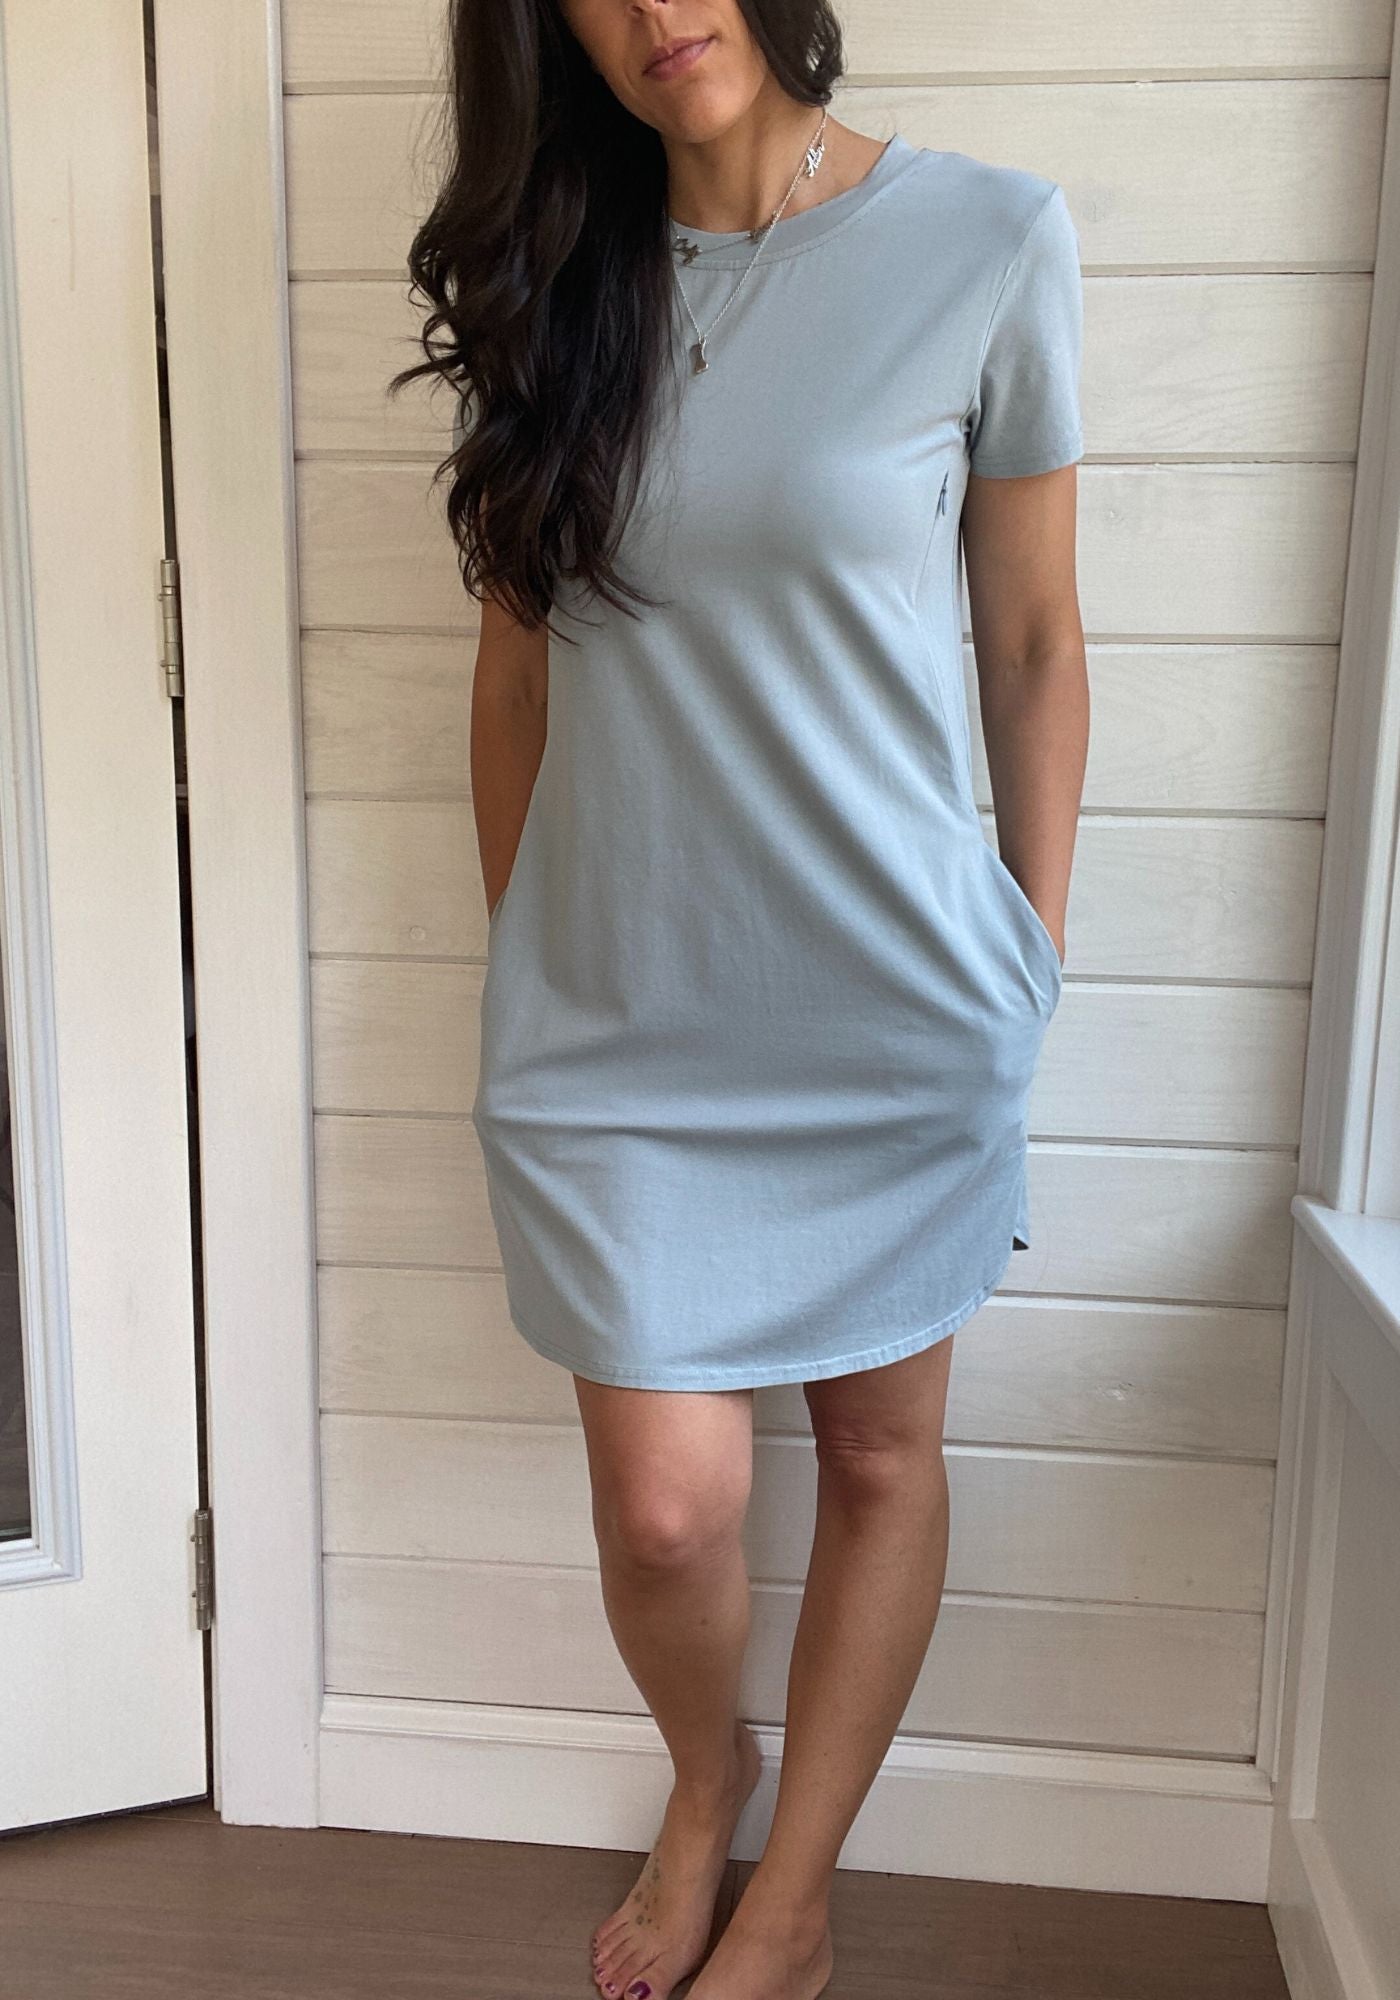 Breastfeeding T-Shirt Dress in Light blue. Two Zippers on right and left side to provide accessibility to nursing mothers. Pockets, rounded hem with two small slits on either side. T-Shirt Style dress perfect to nurse your child in.